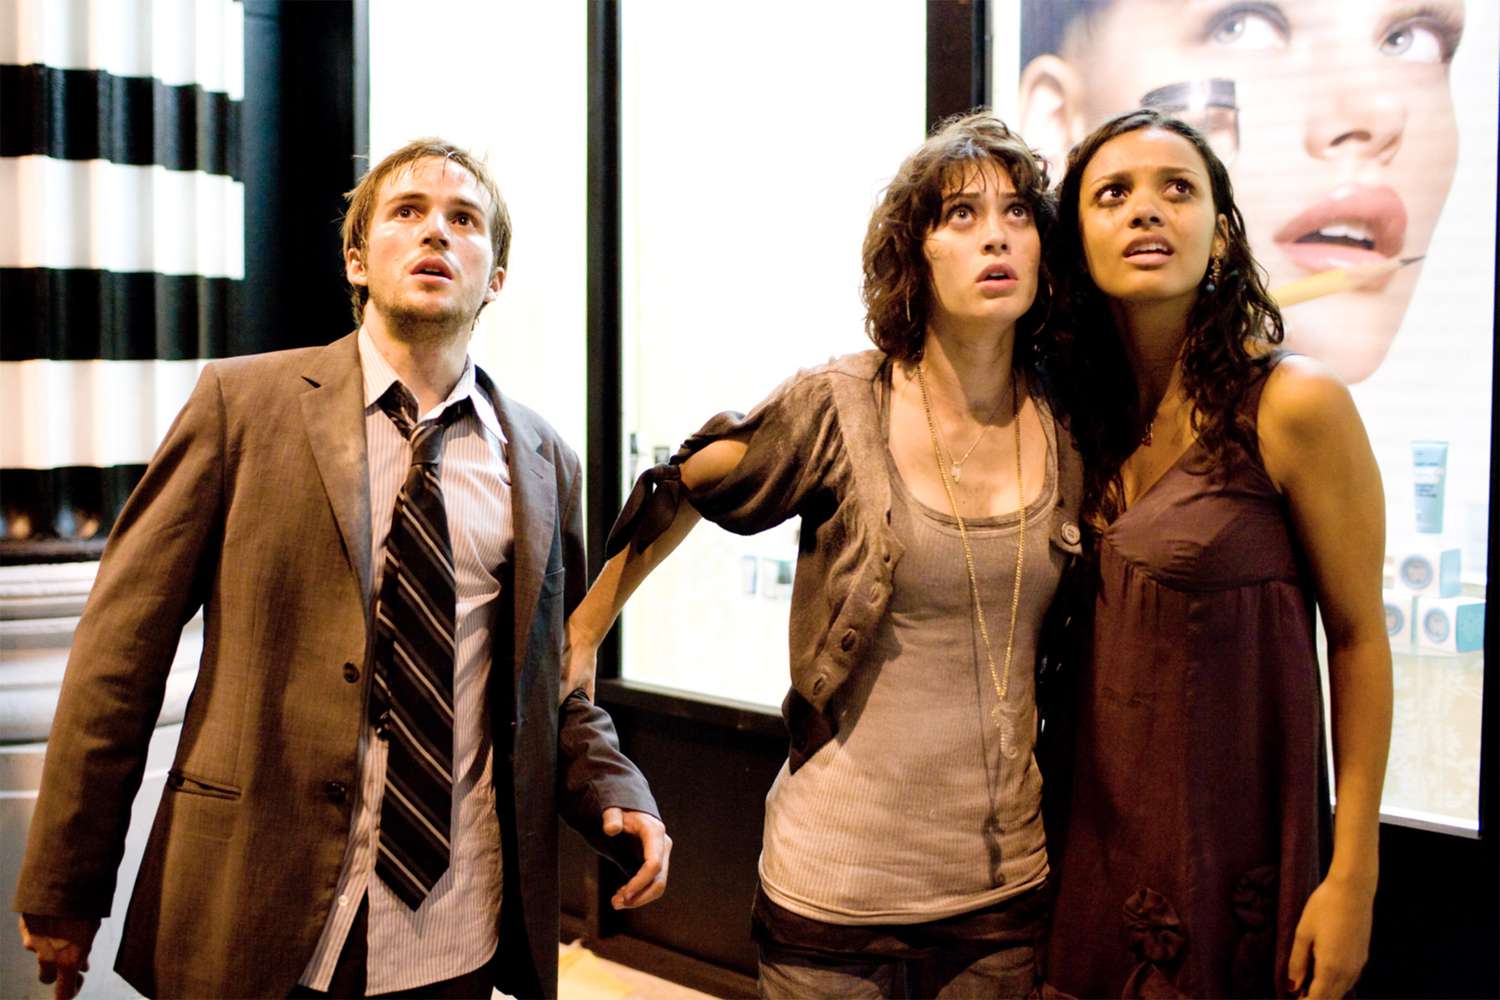 Michael Stahl-David, Lizzy Caplan, and Jessica Lucas in 'Cloverfield'